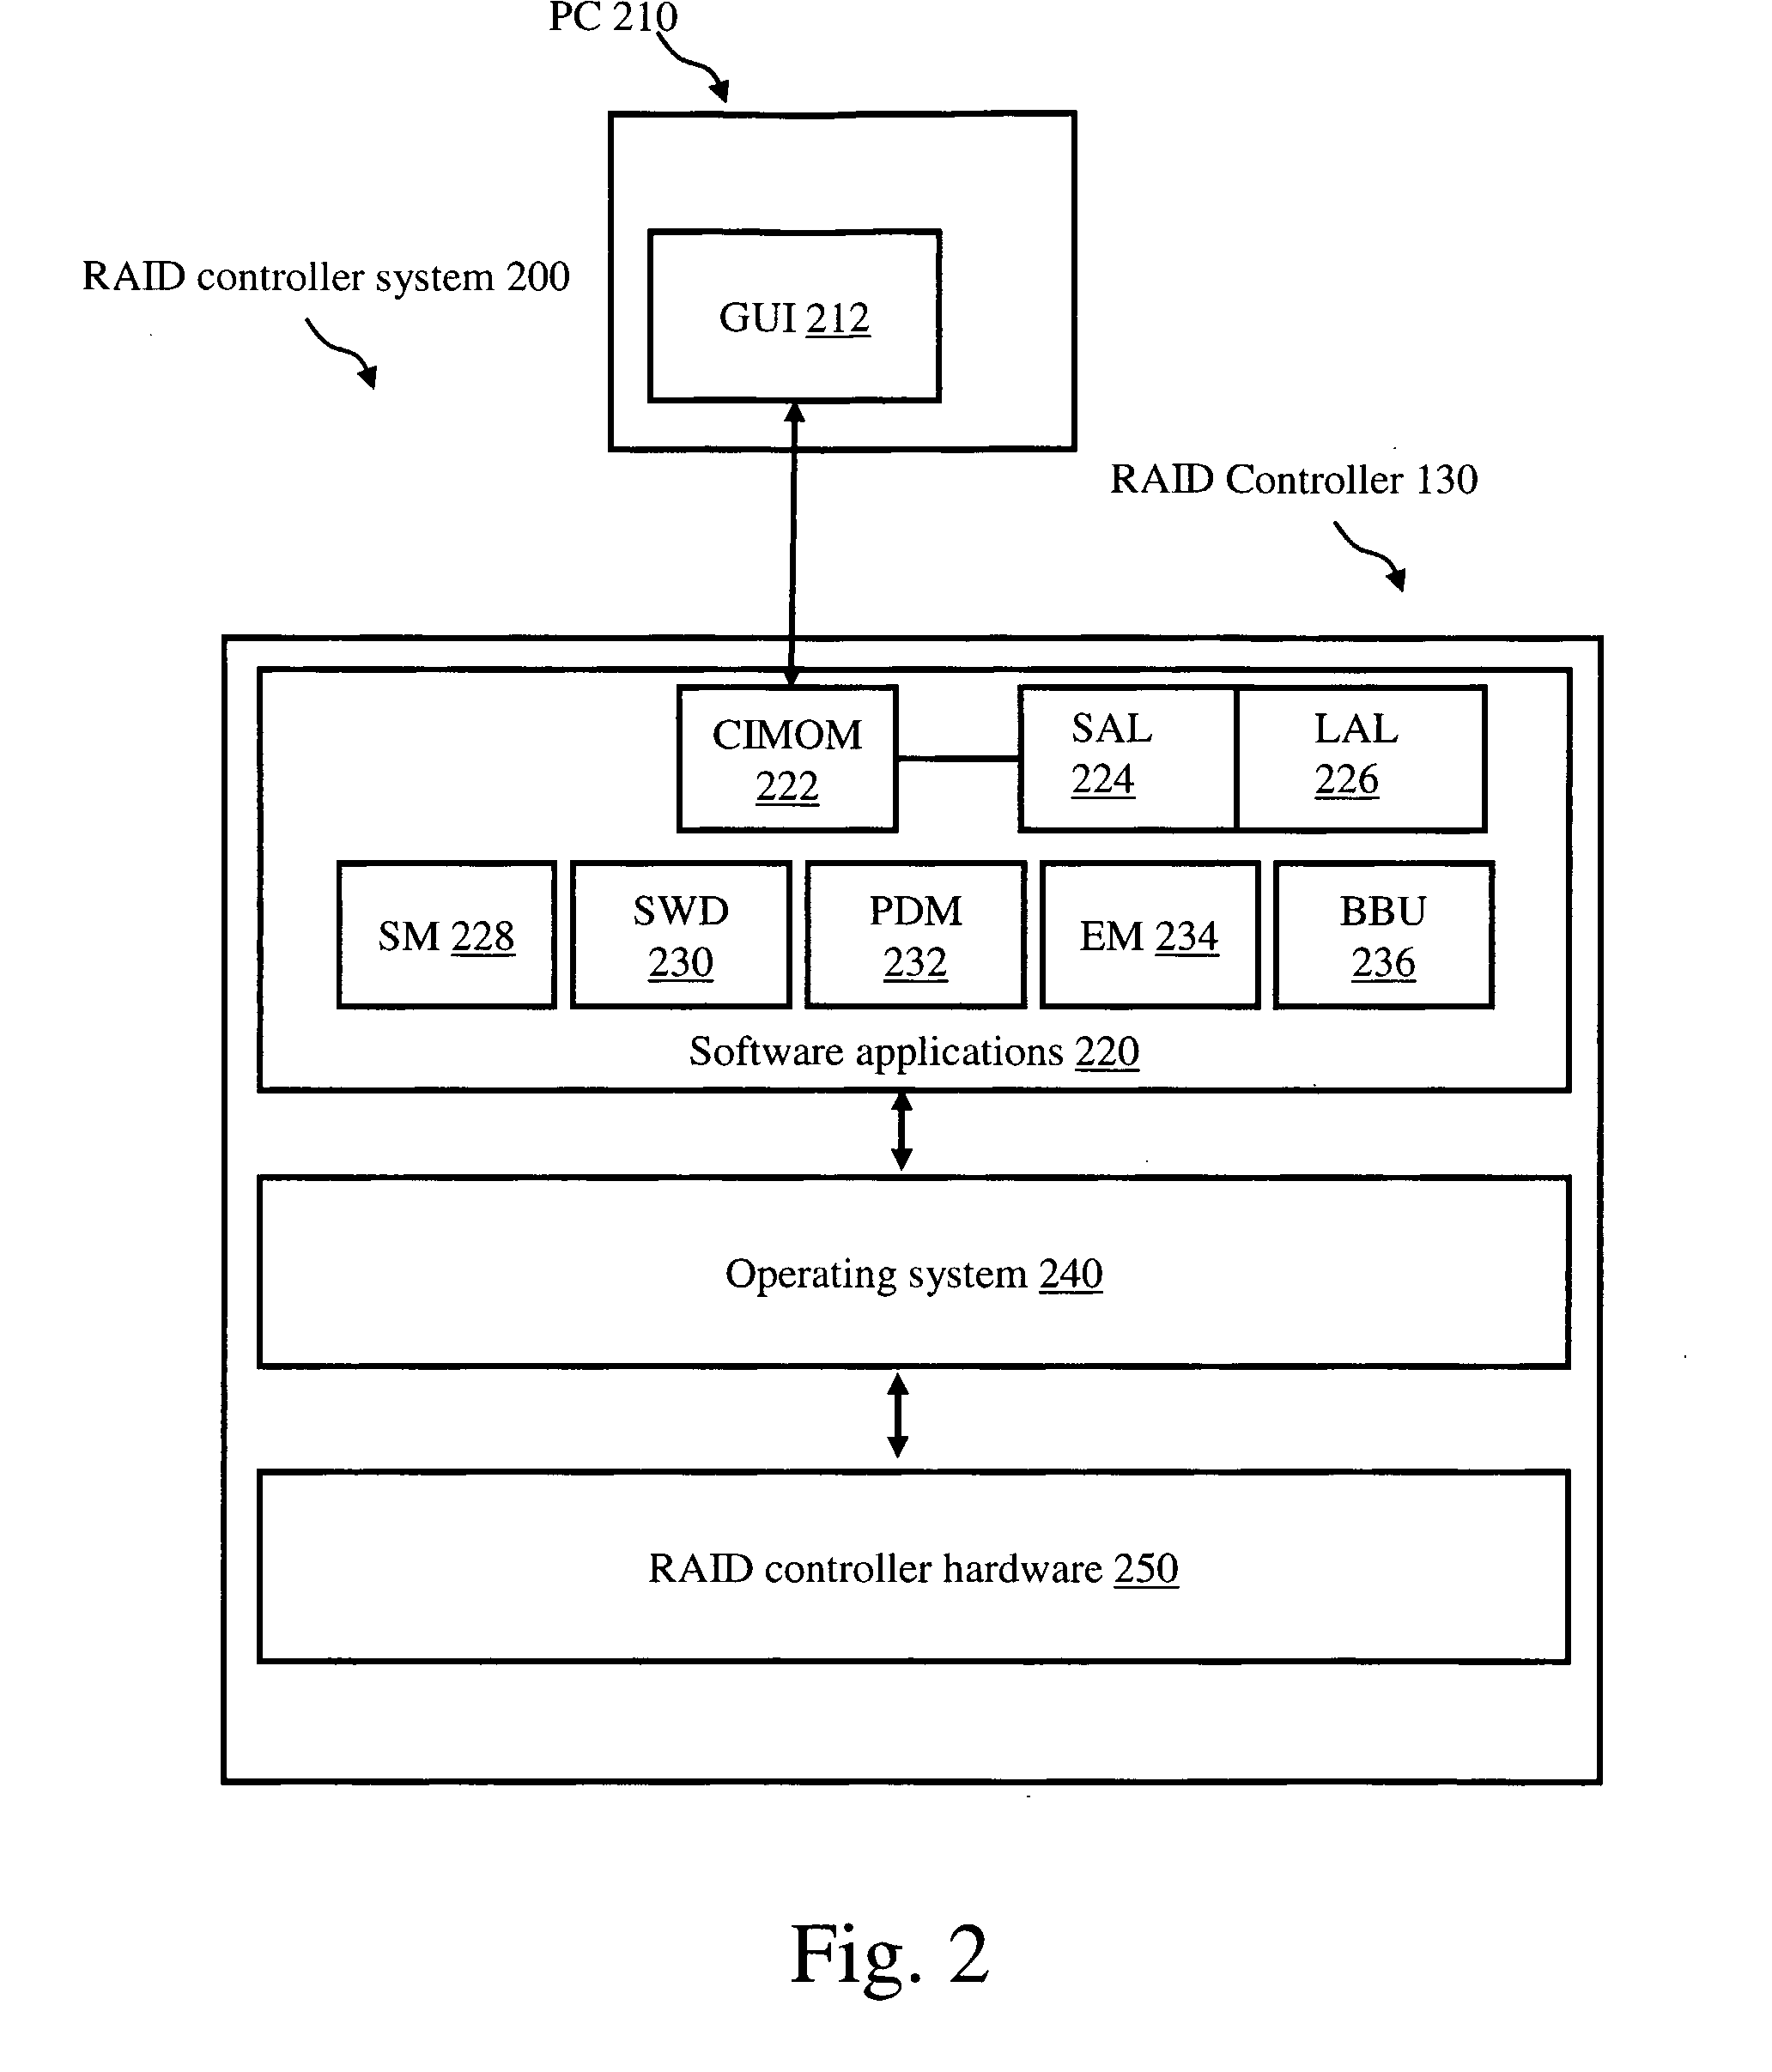 Method and System for Classifying Networked Devices